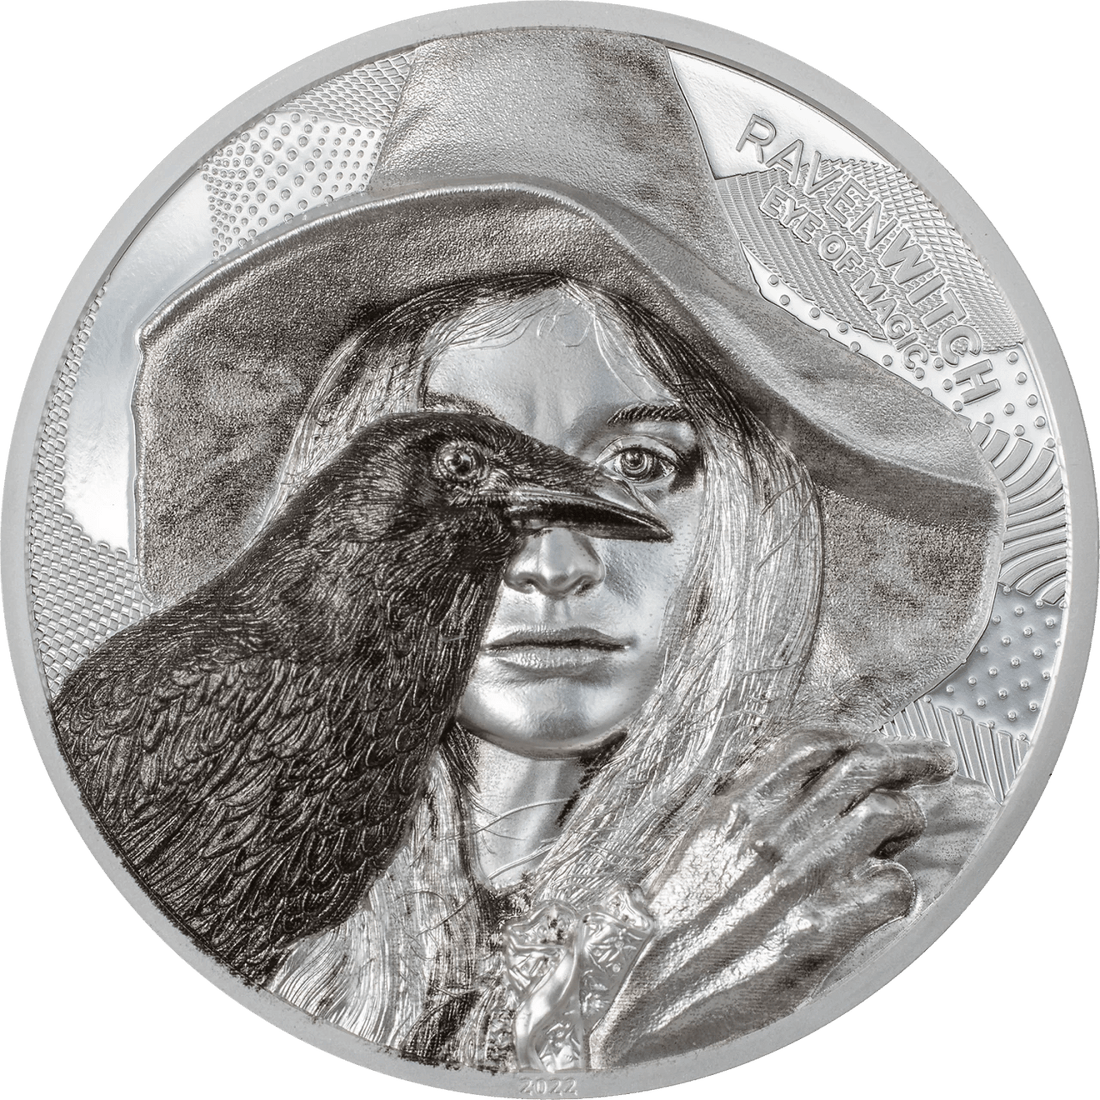 2022 Cook Island RAVEN WITCH - EYE OF MAGIC 2 oz Silver Coin - OZB